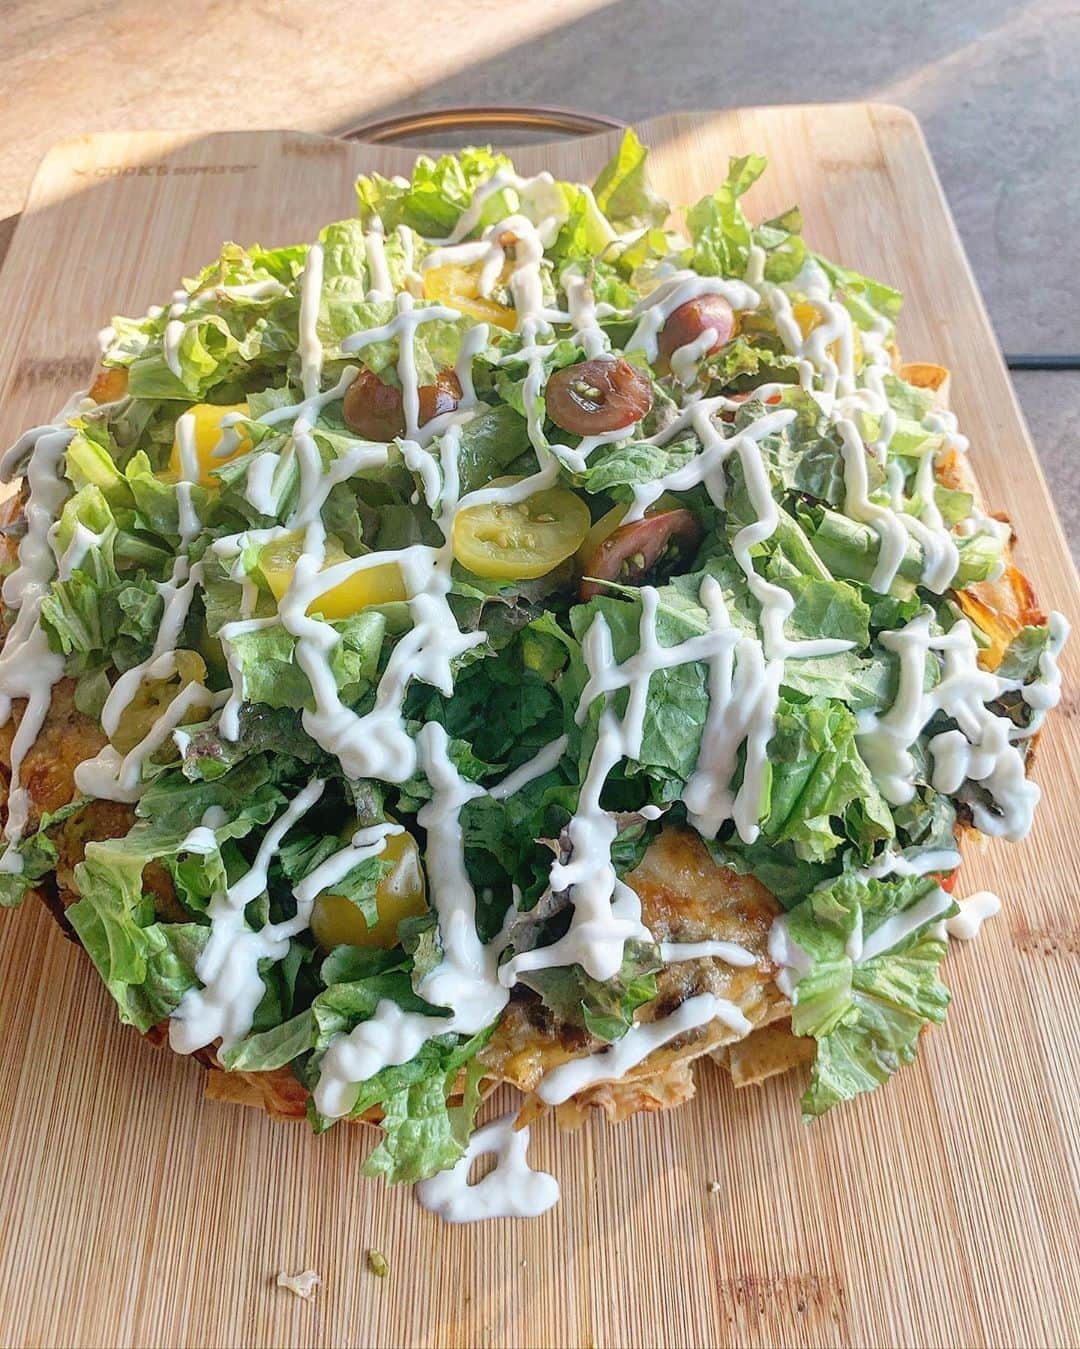 Flavorgod Seasoningsさんのインスタグラム写真 - (Flavorgod SeasoningsInstagram)「Two story taco pizza!⁠ -⁠ Customer:👉 @katesketohomestead⁠ Seasoned with:👉 #Flavorgod Steak & Chop Rub!!⁠ -⁠ FINAL HOURS! $2 Tuesdays! This week's flavor (Habenero)⁠ Click link in the bio -> @flavorgod⁠ www.flavorgod.com⁠ -⁠ I layer two 8 inch pans with cut a carb wraps and place whole bunch of cheese inside! Mozzarella, cheddar, pepper jack. Then cooked some meat with onions and put that on top. Then layered it again with some cheese placed it in the oven on 350 for 15 minutes! I used @flavorgod steak seasoning for the meat - the first time and holy! Yum!!! My new favorite! (Ranch is still up there though, that shits bomb)⁠ ⁠ Took out and placed avocado, sour cream in the middle and placed a layer on top! Then came the tomato’s and lettuce drizzled with sour cream!⁠ -⁠ Flavor God Seasonings are:⁠ 💥 Zero Calories per Serving ⁠ 🙌 0 Sugar per Serving⁠ 🔥 #KETO & #PALEO Friendly⁠ 🌱 GLUTEN FREE & #KOSHER⁠ ☀️ VEGAN-FRIENDLY ⁠ 🌊 Low salt⁠ ⚡️ NO MSG⁠ 🚫 NO SOY⁠ 🥛 DAIRY FREE *except Ranch ⁠ 🌿 All Natural & Made Fresh⁠ ⏰ Shelf life is 24 months⁠ -⁠ #food #foodie #flavorgod #seasonings #glutenfree #mealprep #seasonings #breakfast #lunch #dinner #yummy #delicious #foodporn」7月29日 10時01分 - flavorgod